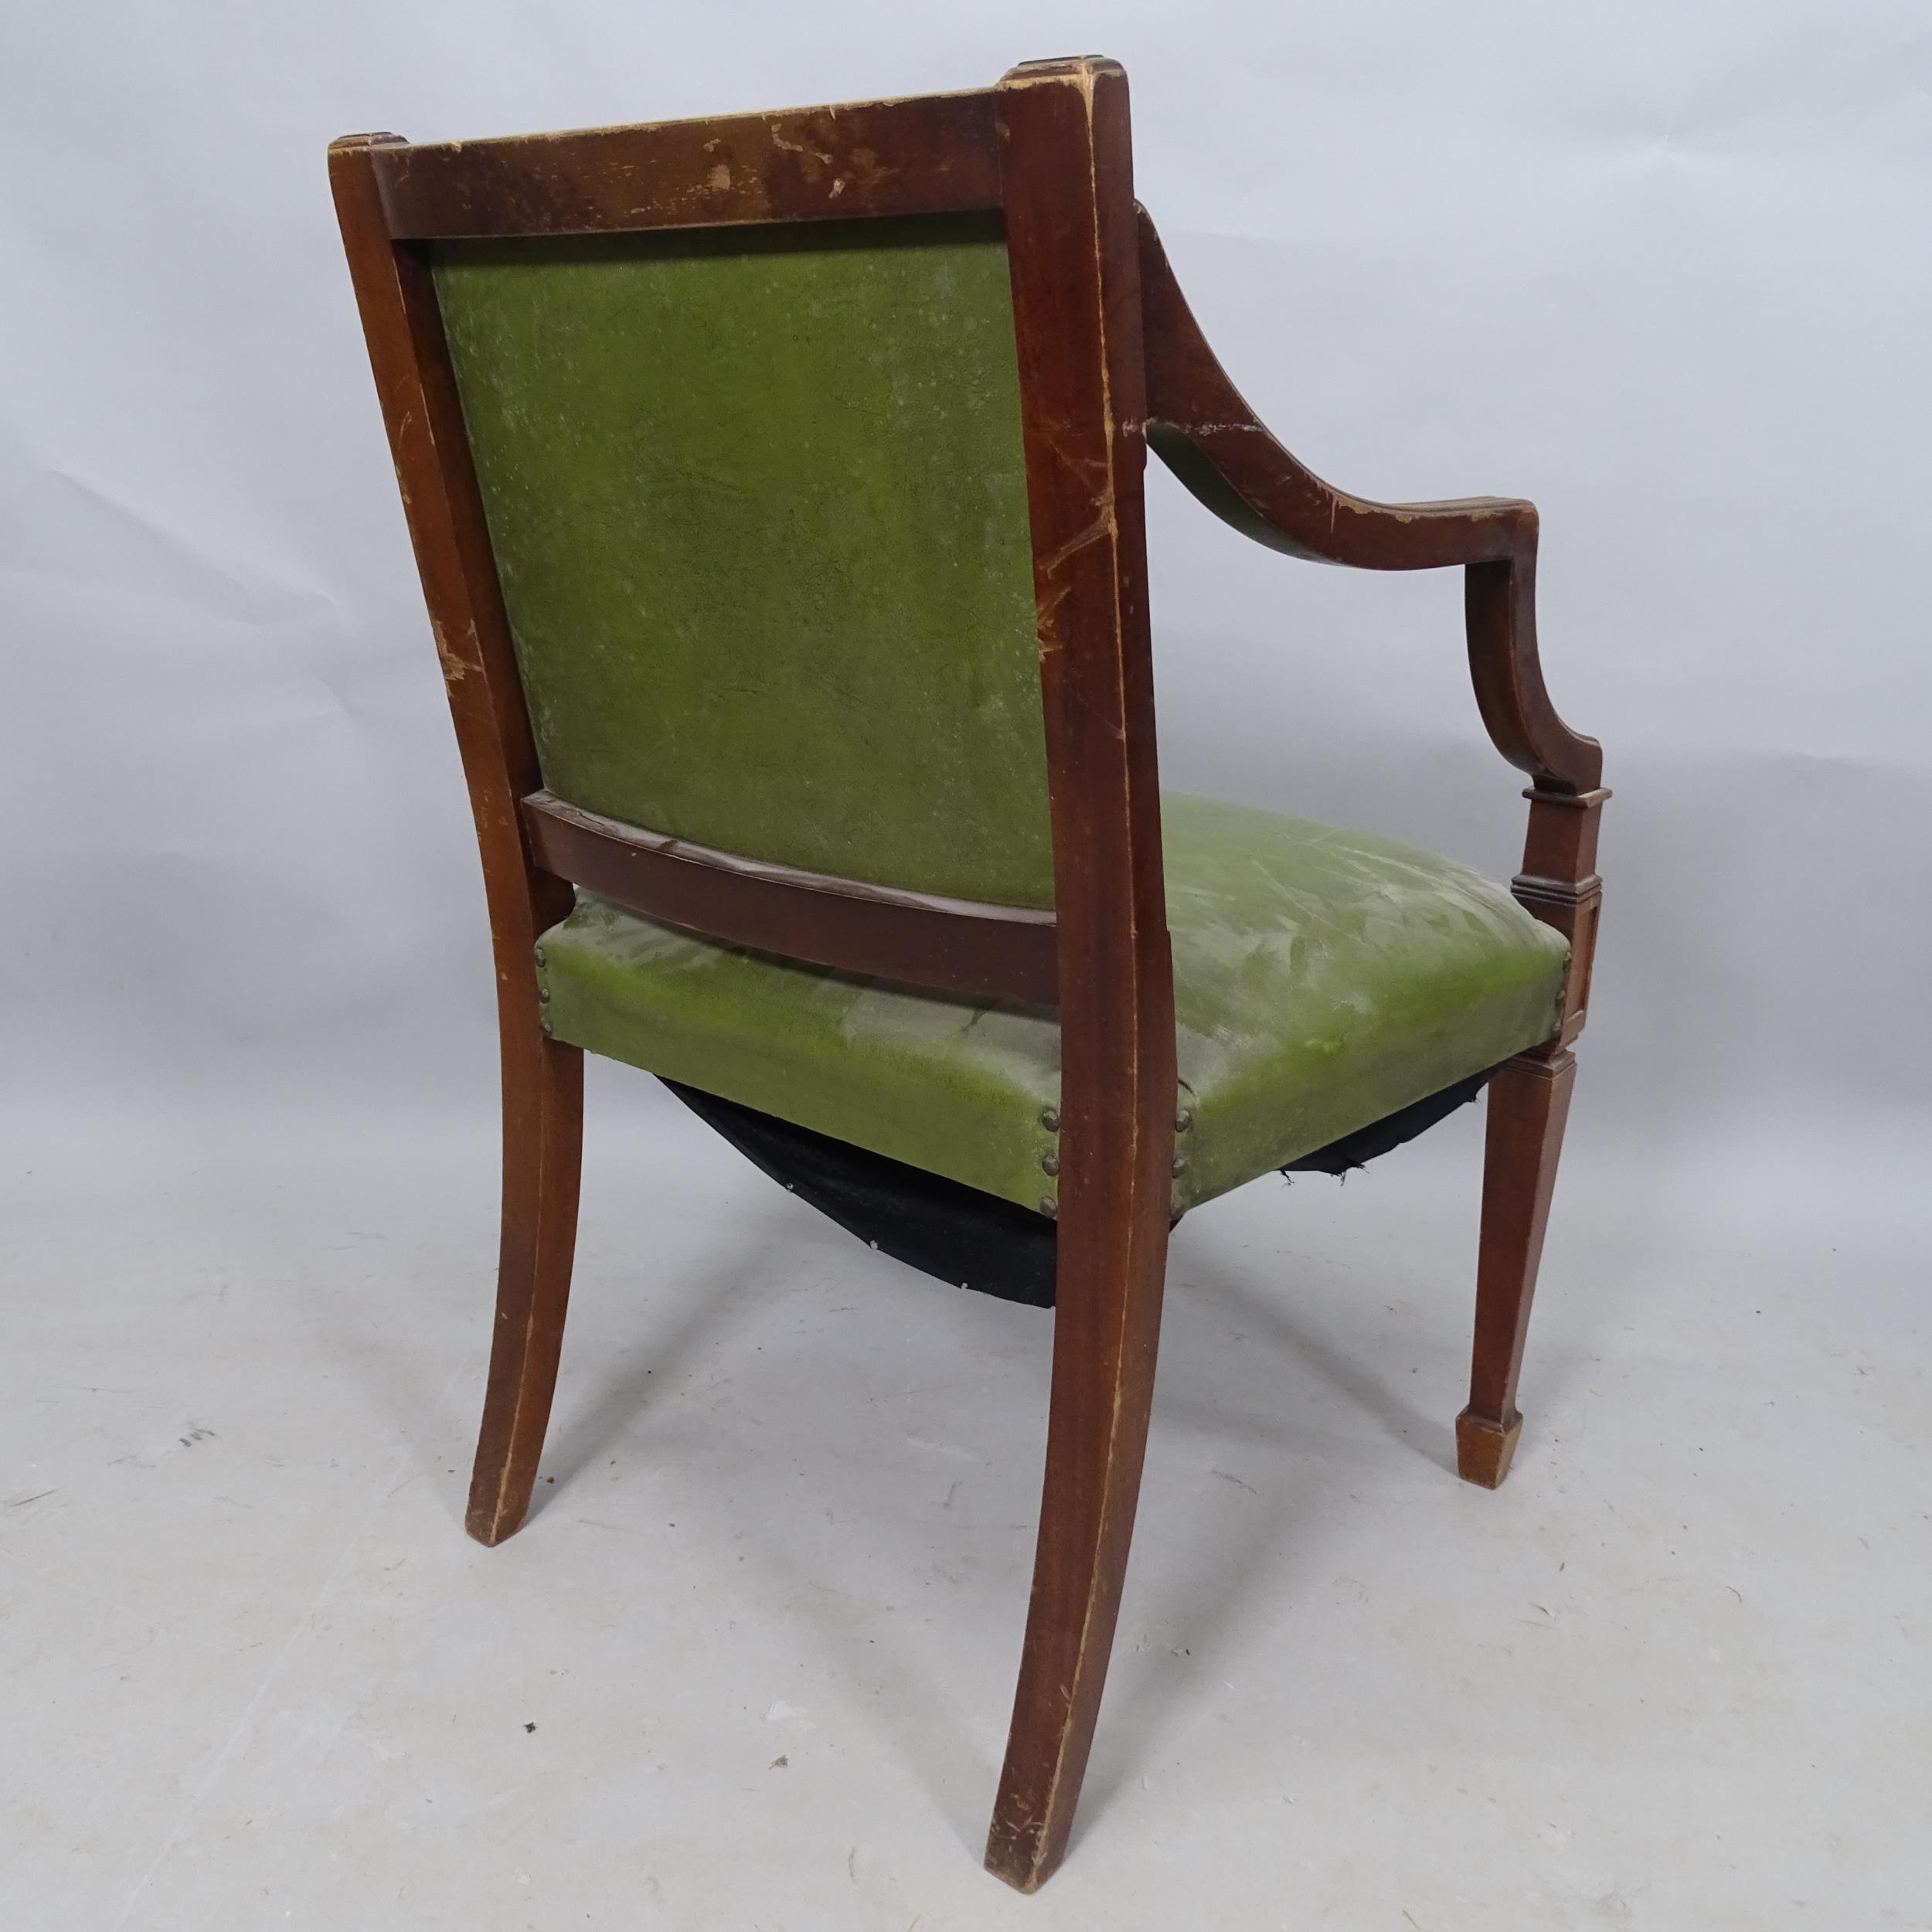 A Georgian style mahogany open-arm desk chair - Image 2 of 2